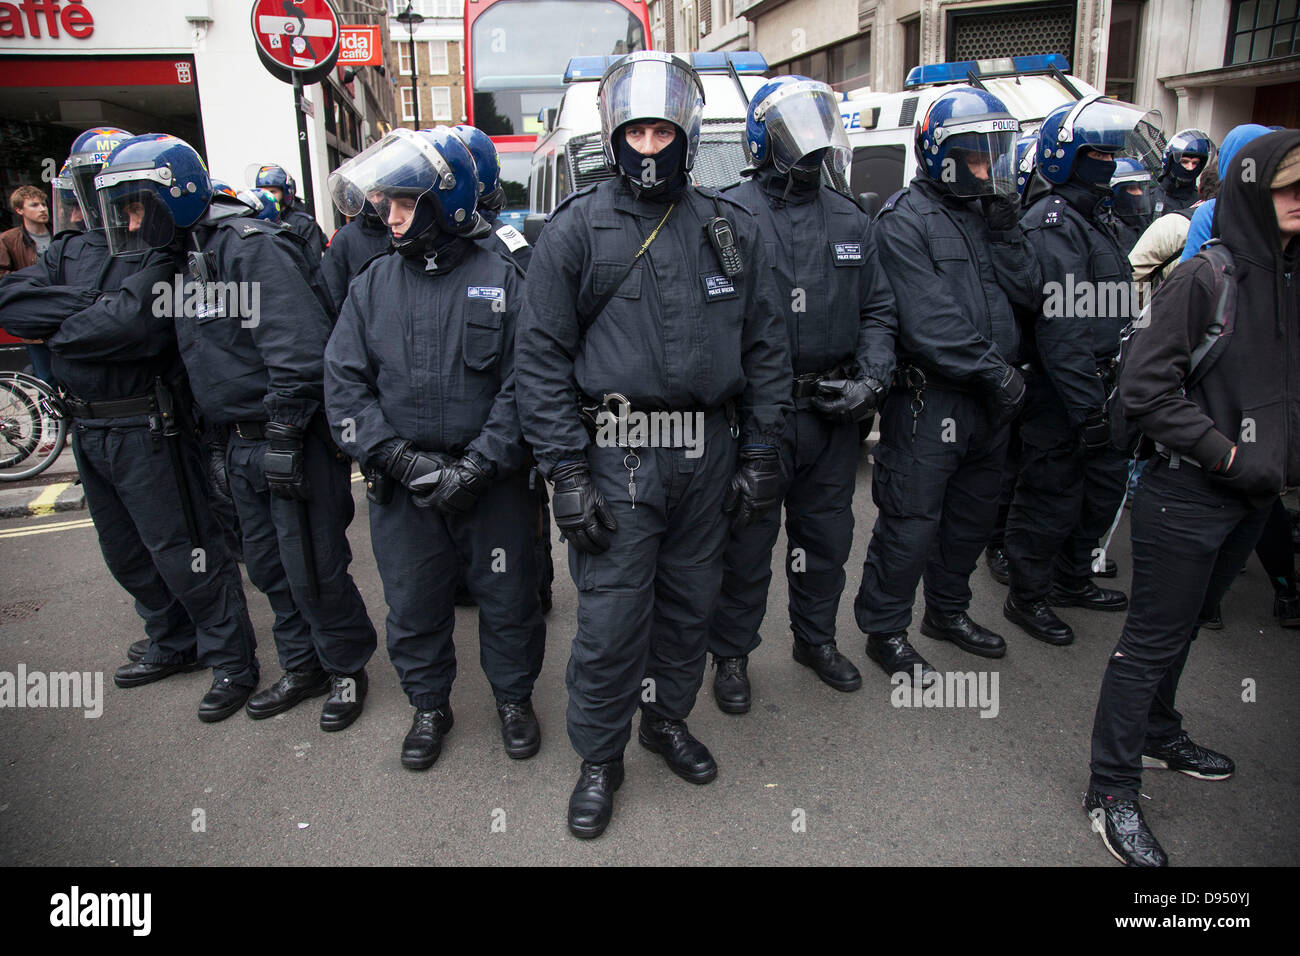 Demonstration against the upcoming G8 summit in central London, UK. Police in riot gear cordoned off a part of Beak St. in Soho where activists who were planning a big protest were being surrounded. Stock Photo